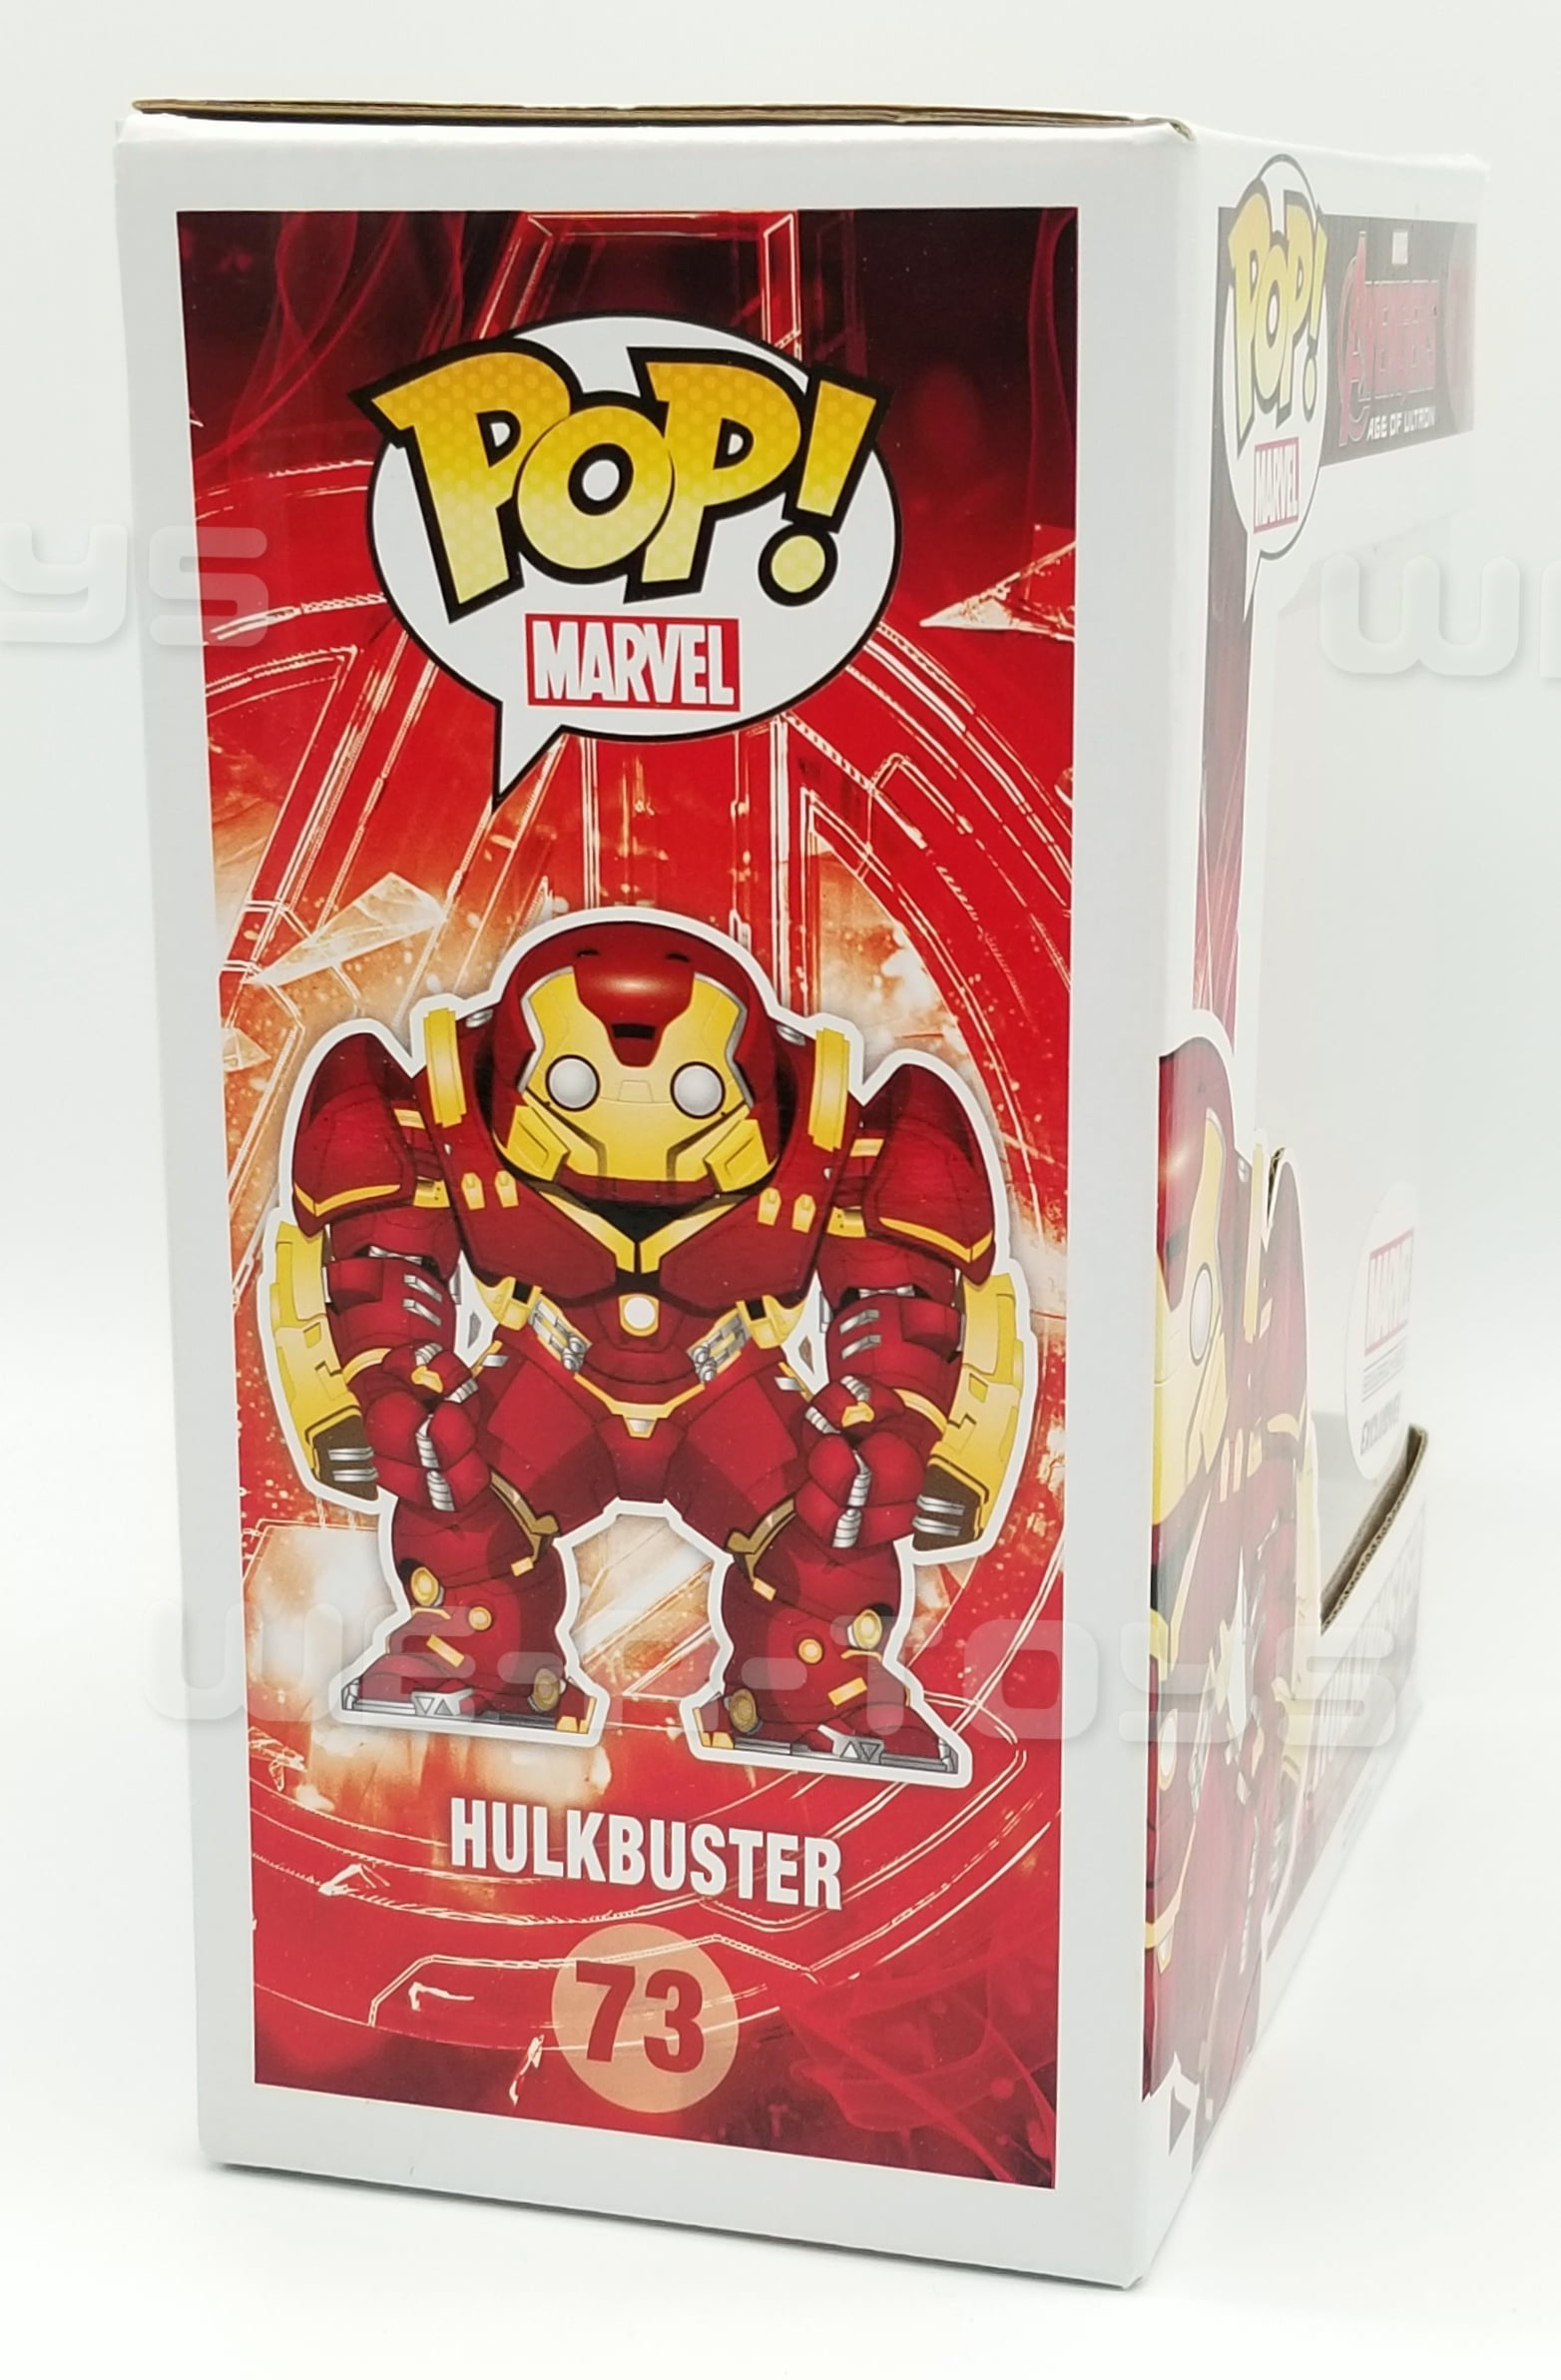 Funko Pop XL Hulkbuster vs. Hulk NYCC Exclusive Now Available Online